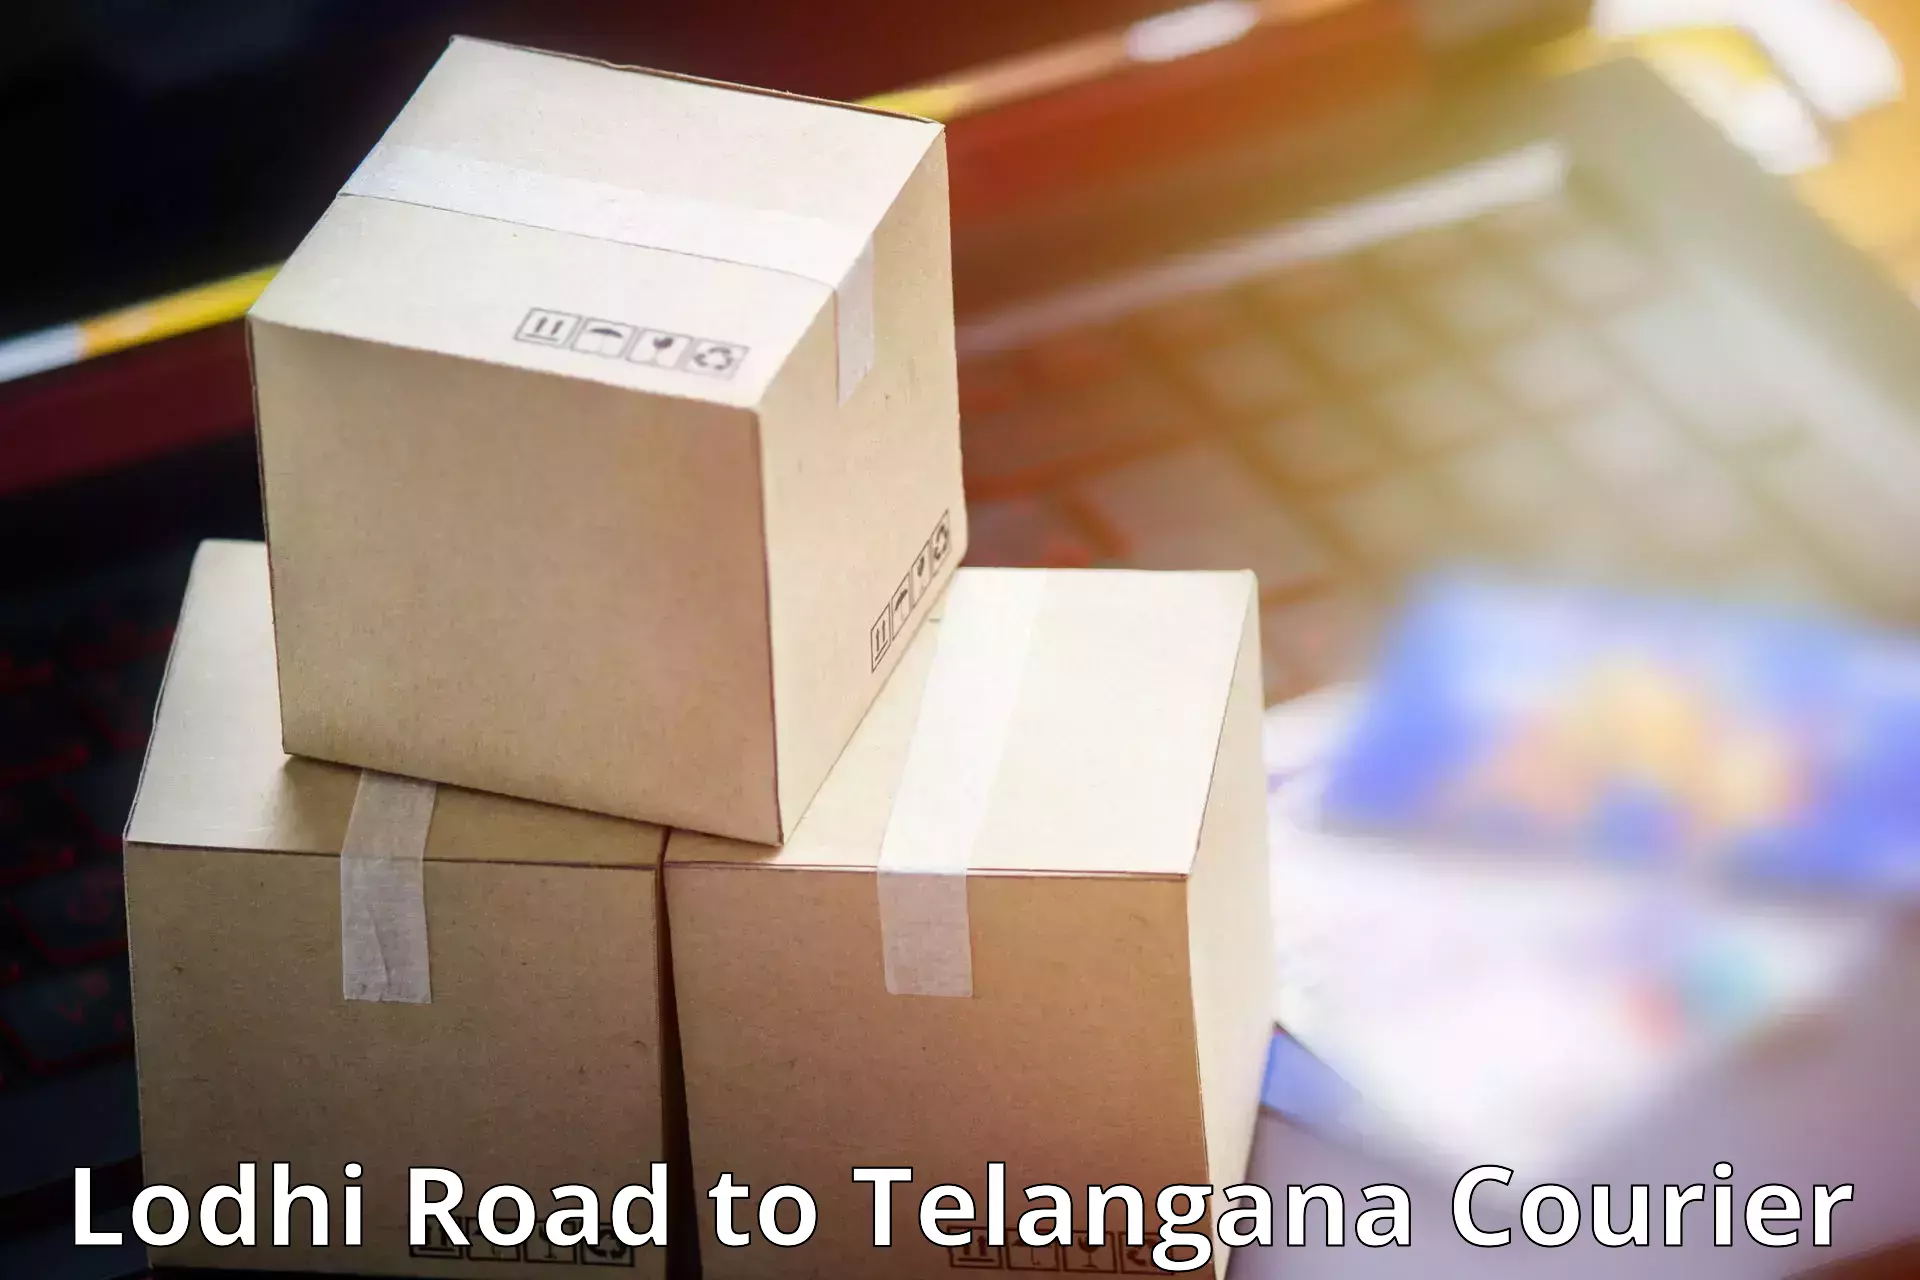 Comprehensive shipping network Lodhi Road to Manneguda